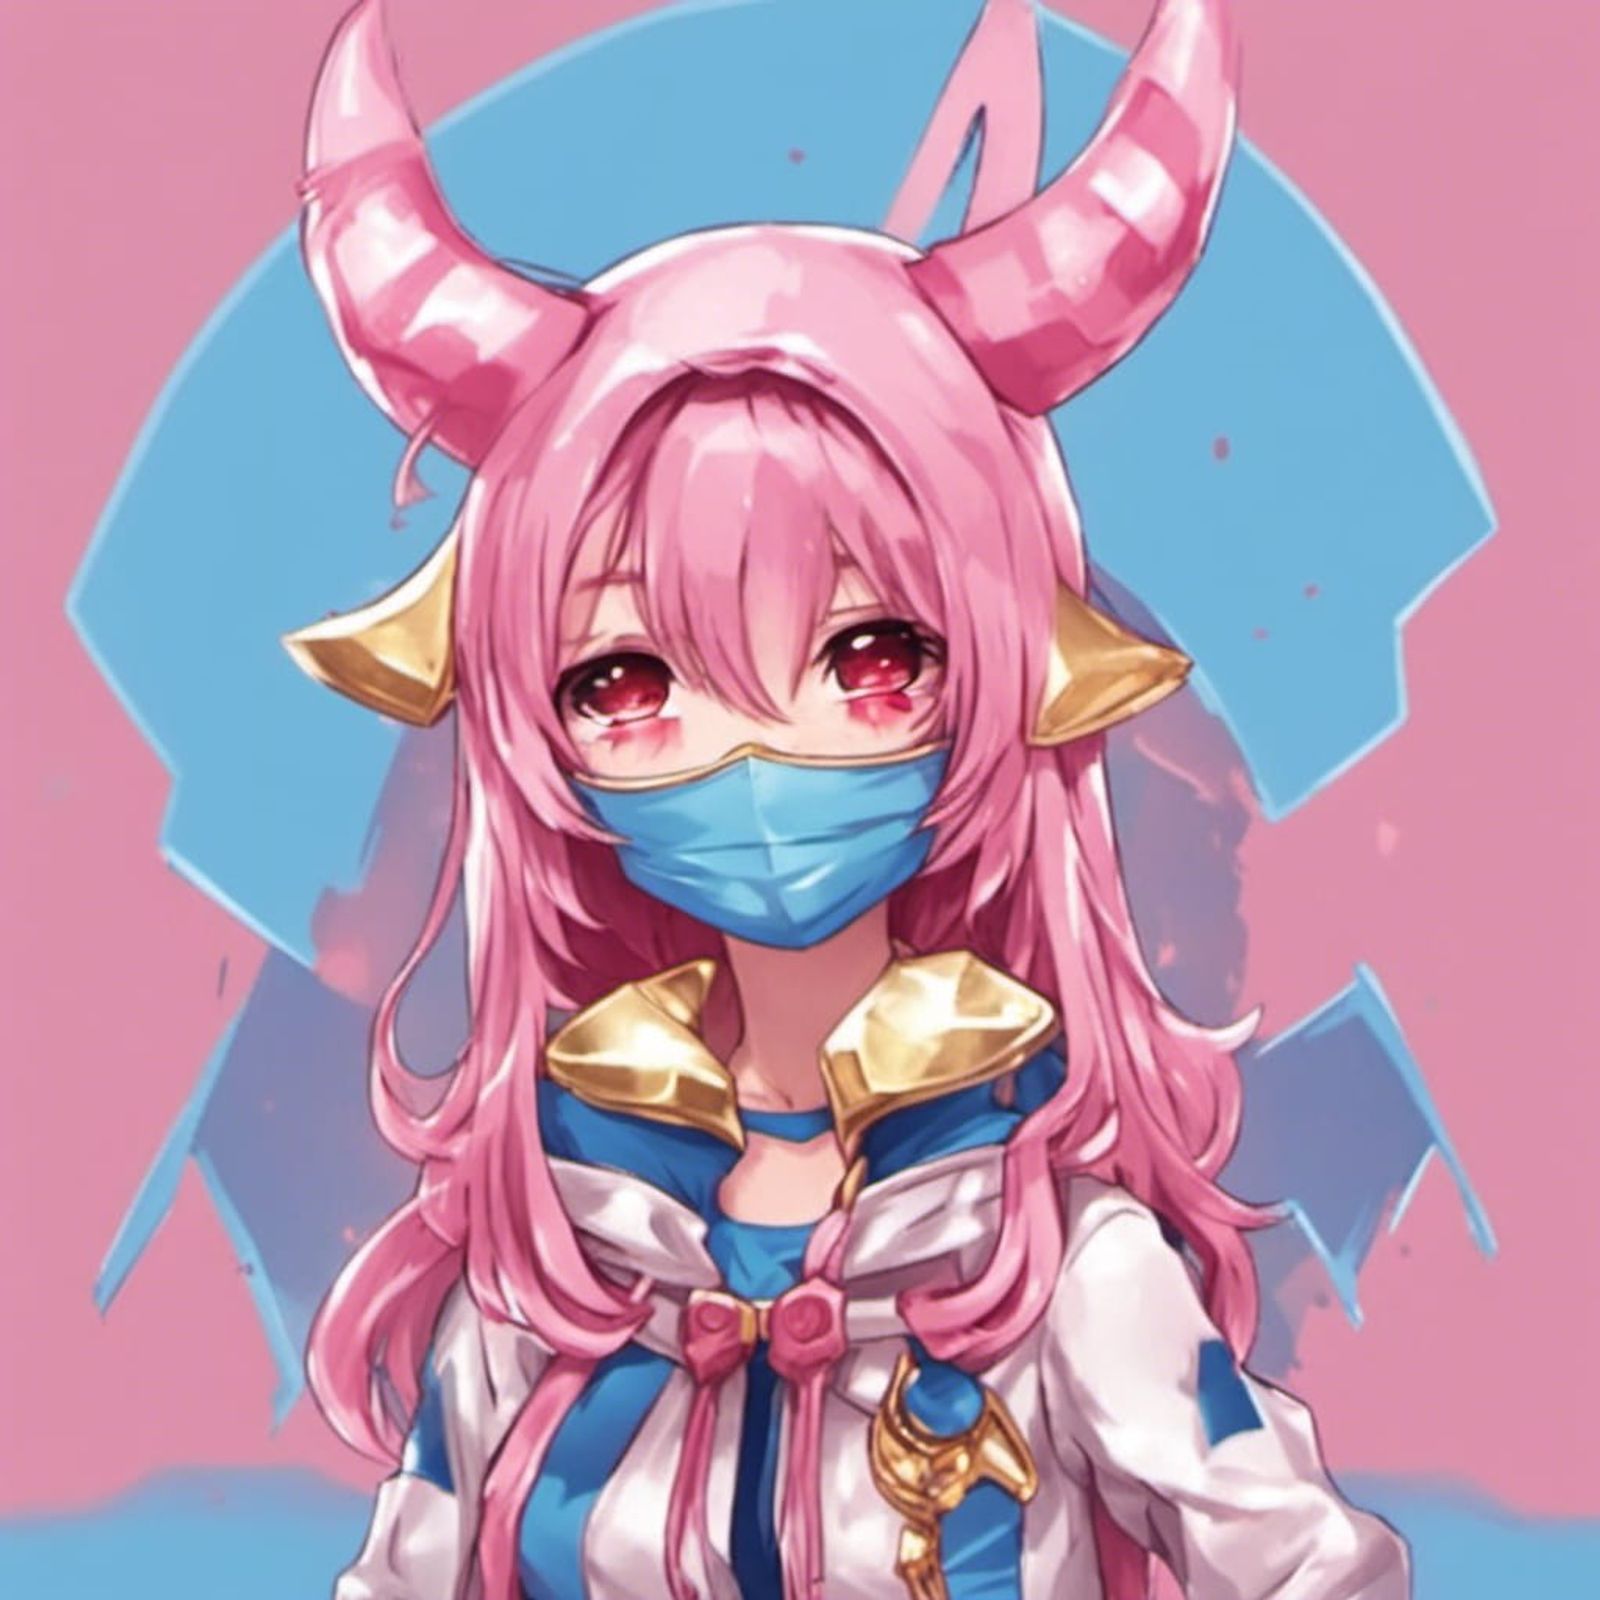 cute Roblox bacon from Roblox with gold demon horns with mask must be super  cute and cool background color pink and blue - AI Generated Artwork -  NightCafe Creator